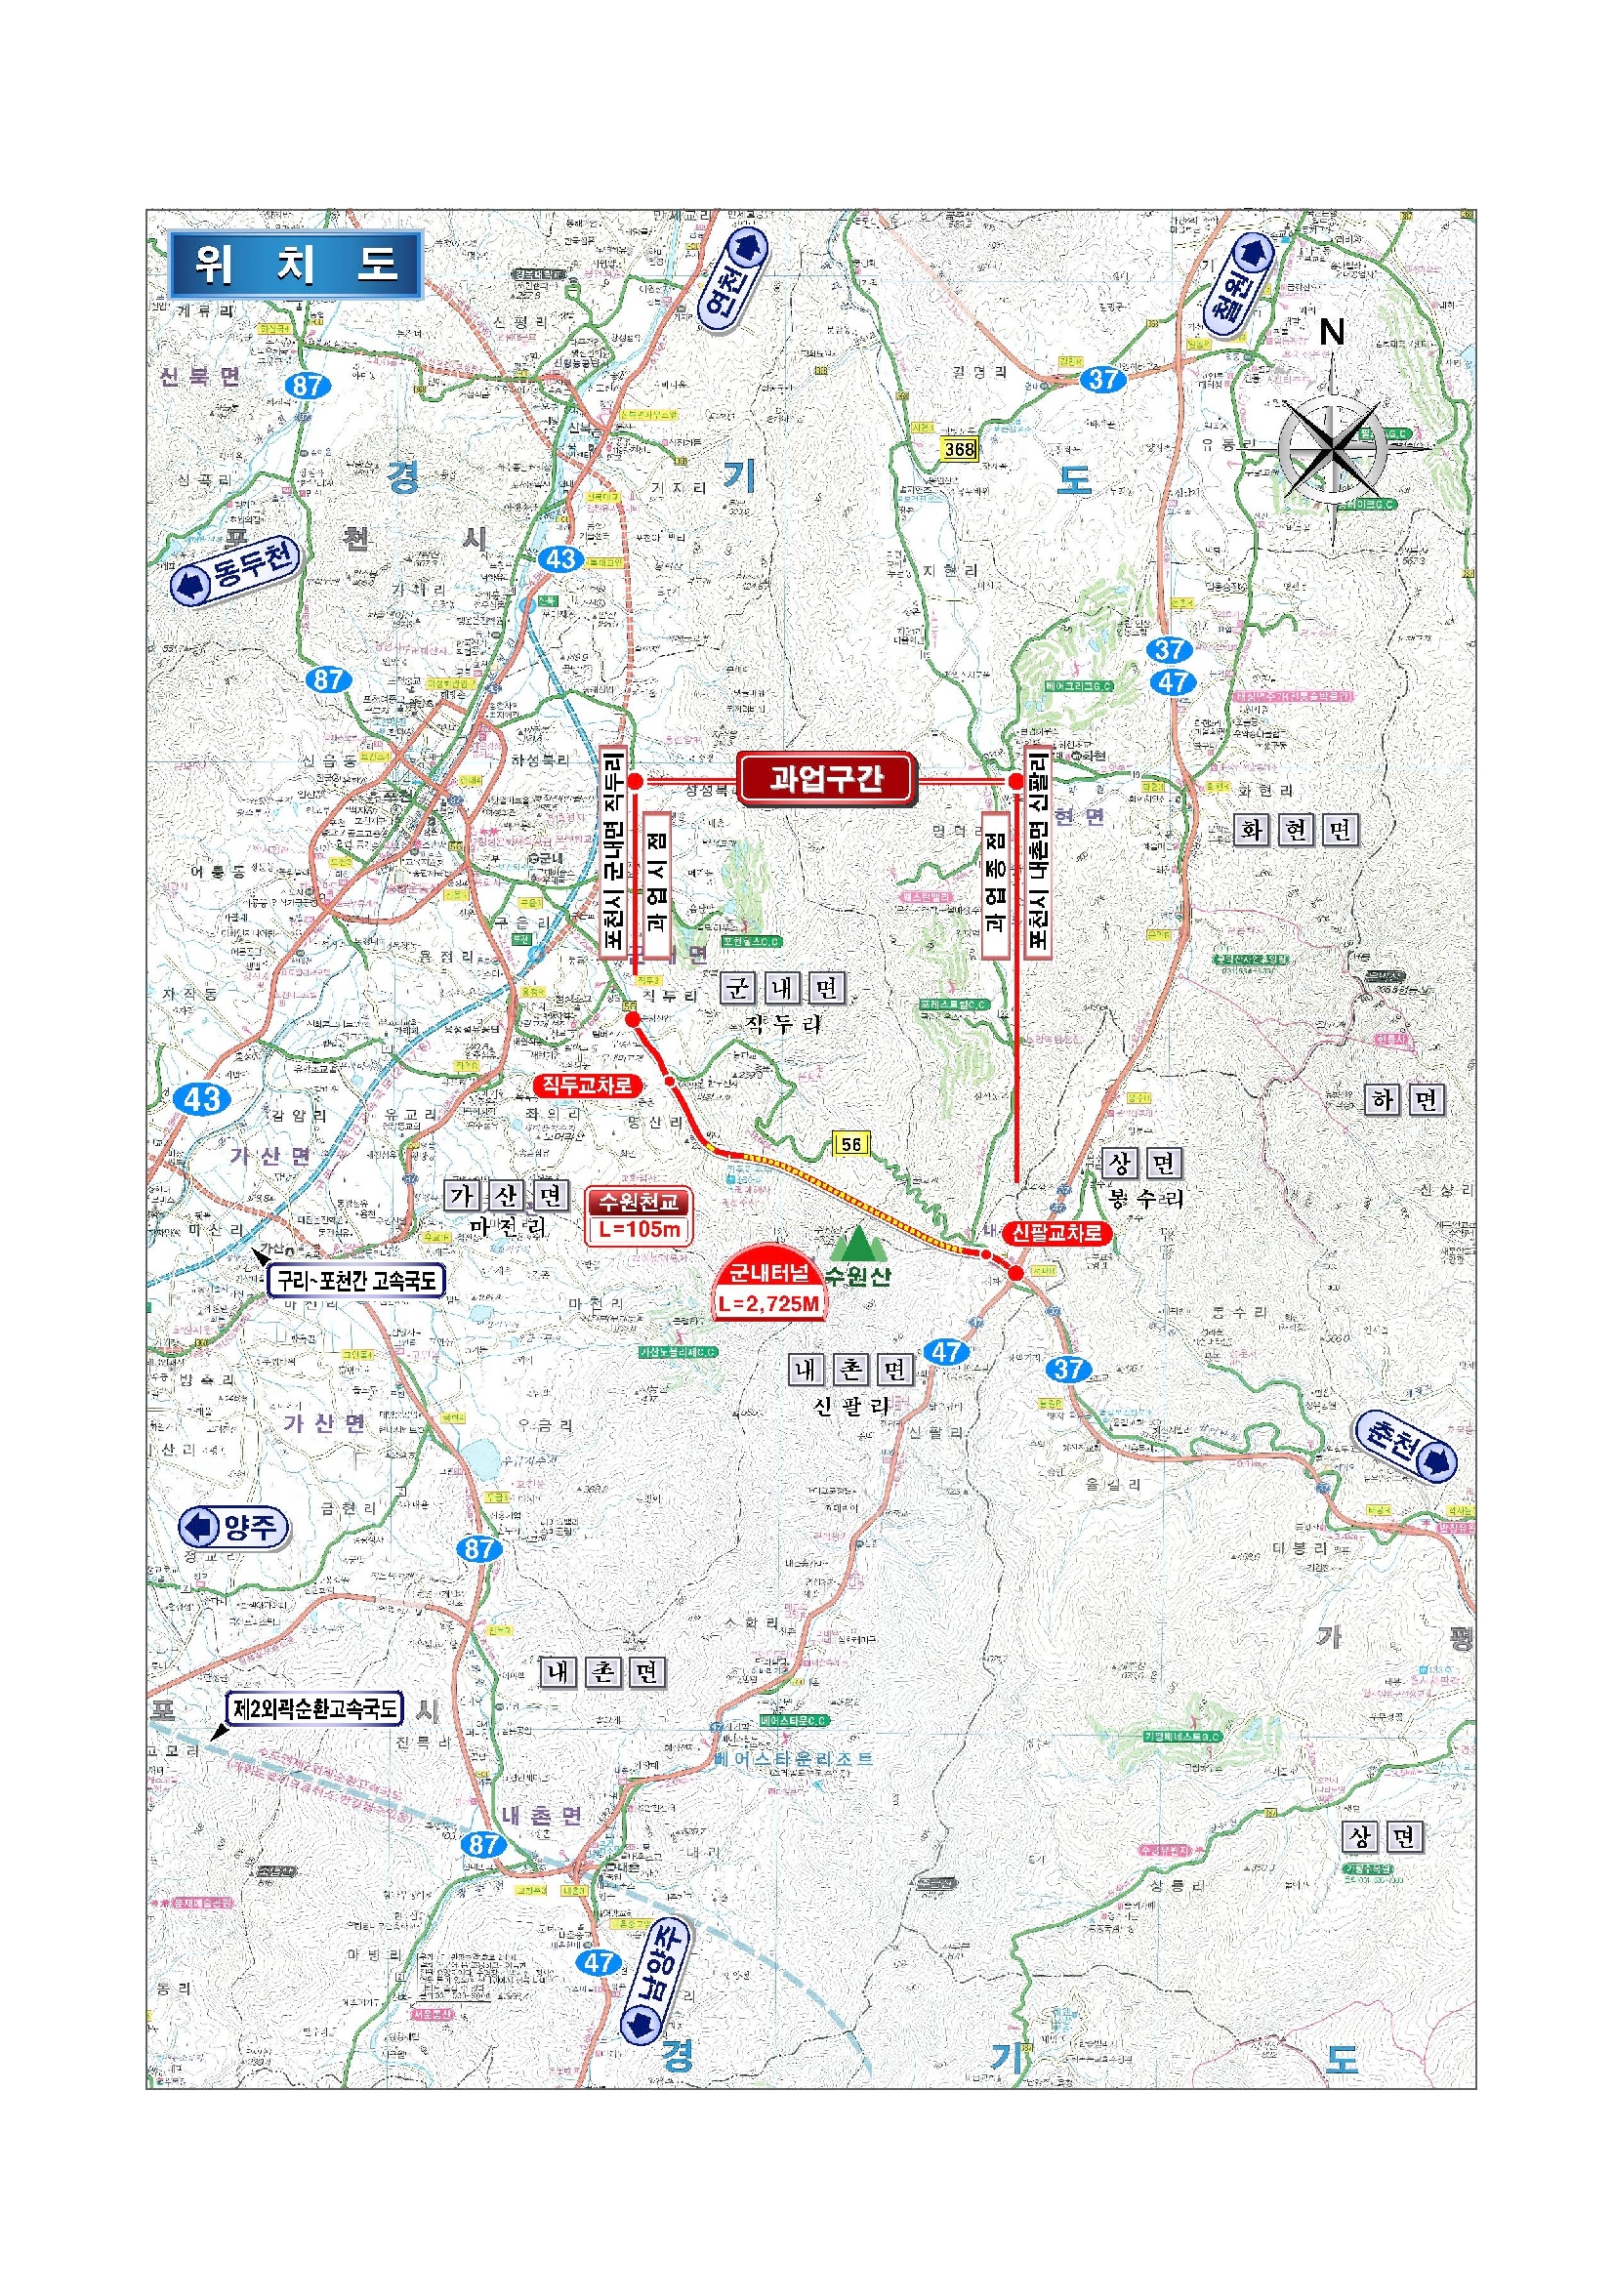 Preliminary and detailed design service for Gunnae-Naechon road construction project